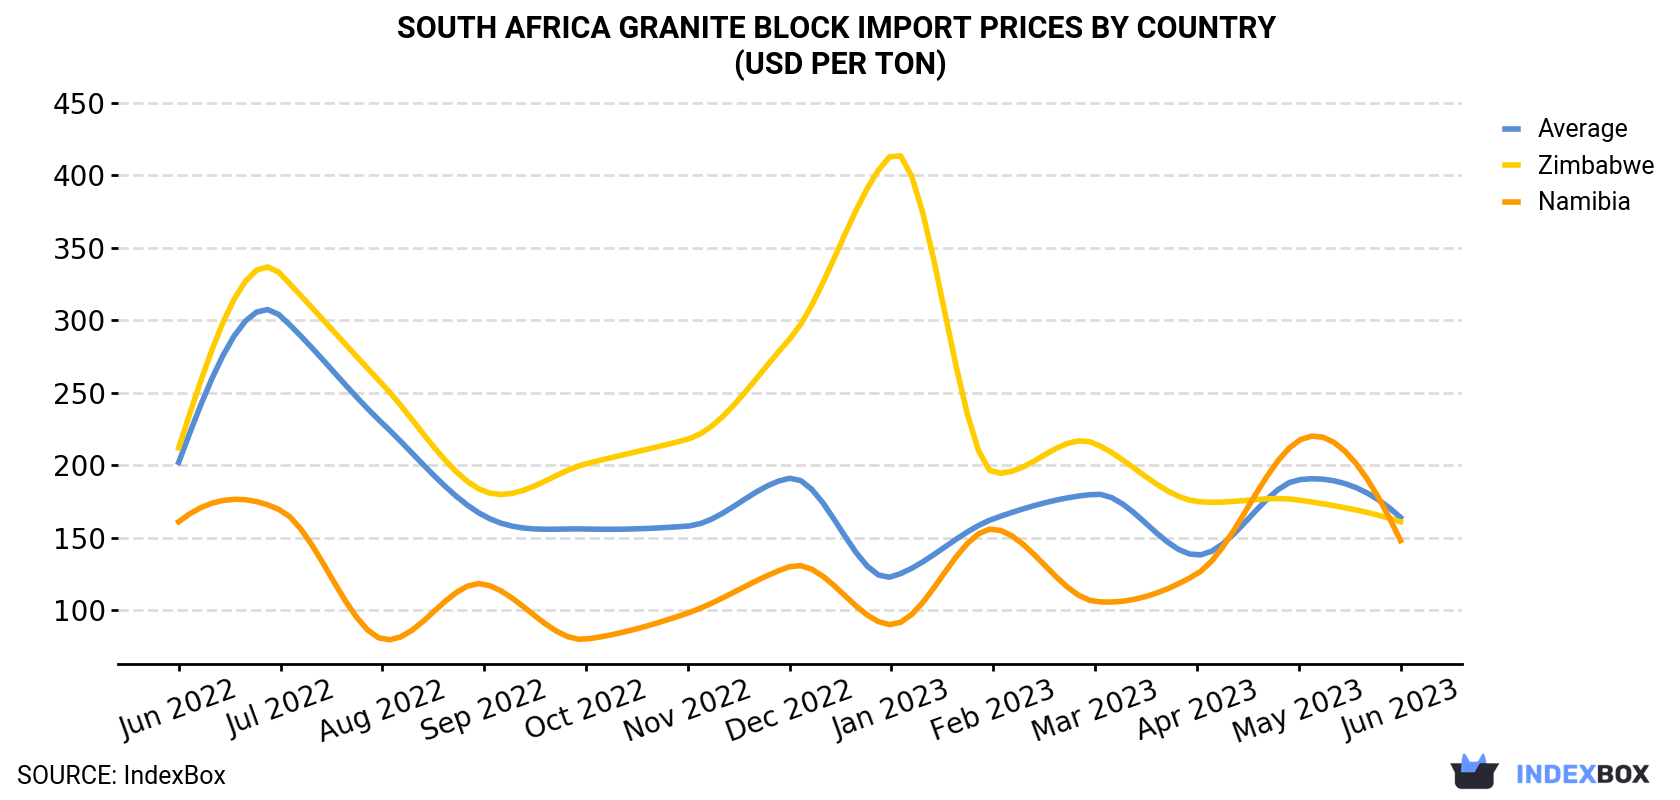 South Africa Granite Block Import Prices By Country (USD Per Ton)